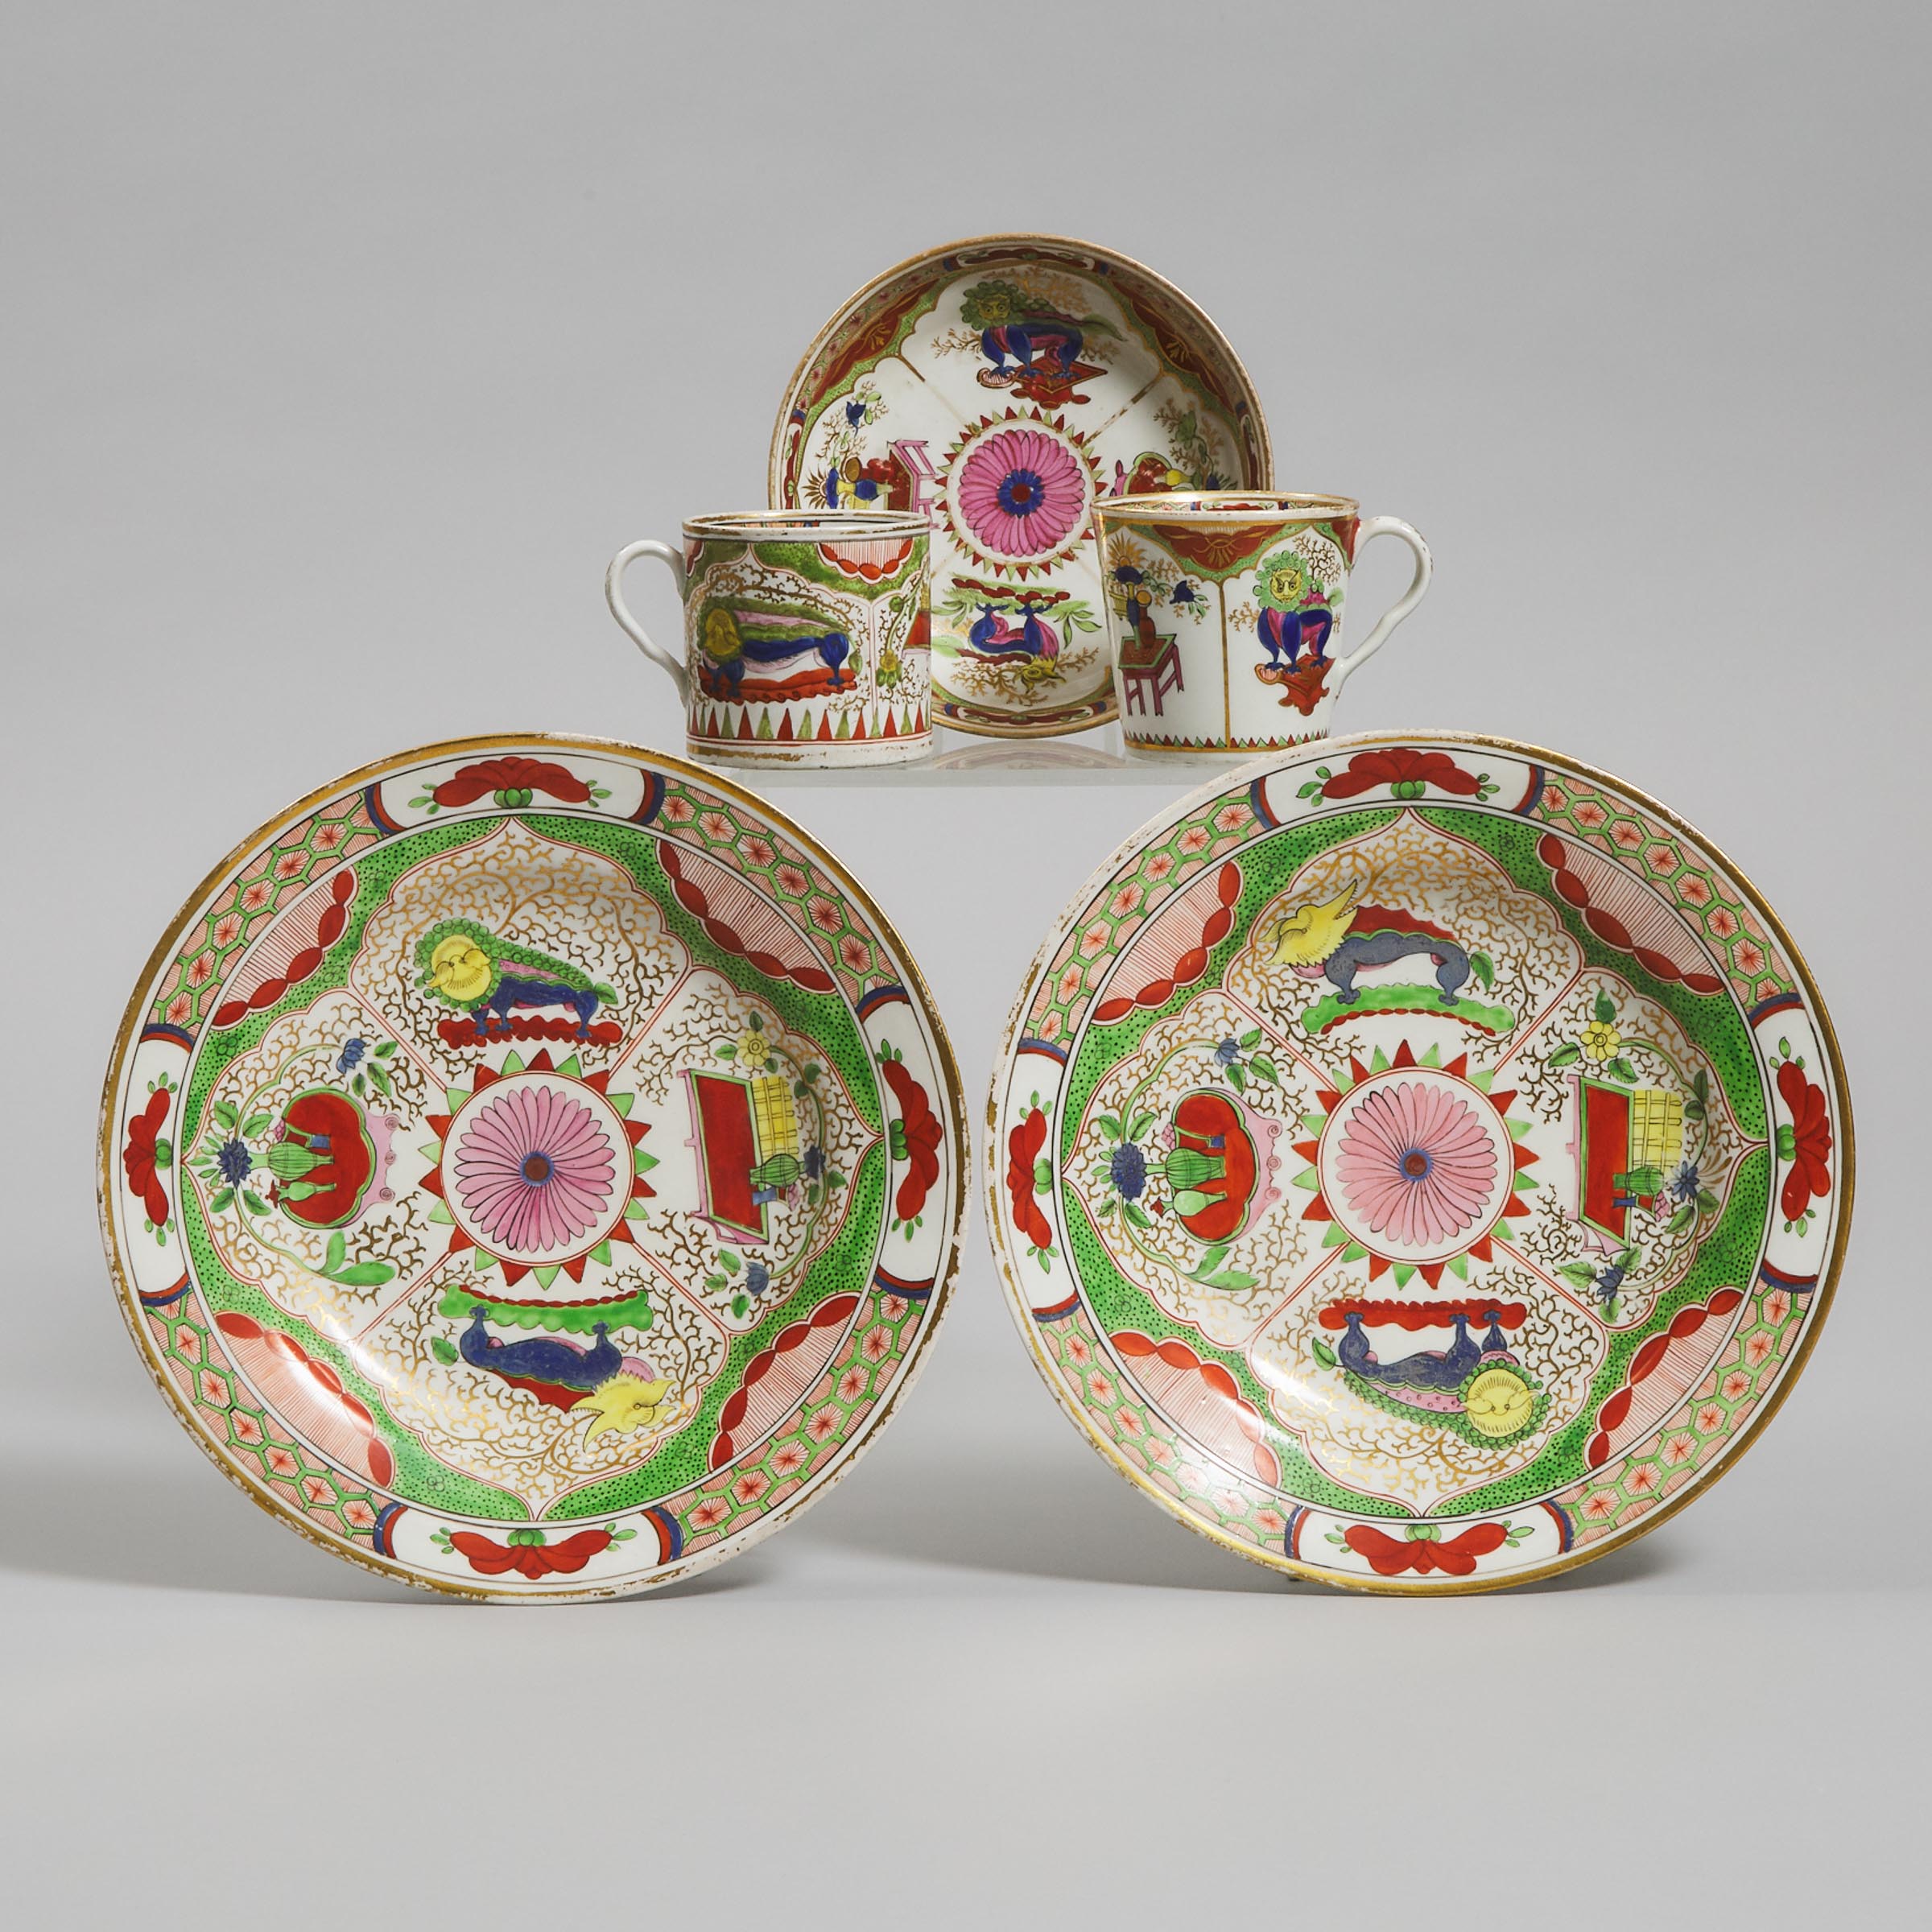 Pair of Chamberlains Worcester 'Dragon in Compartments' Plates, Two Coffee Cups and a Saucer, c.1800-10